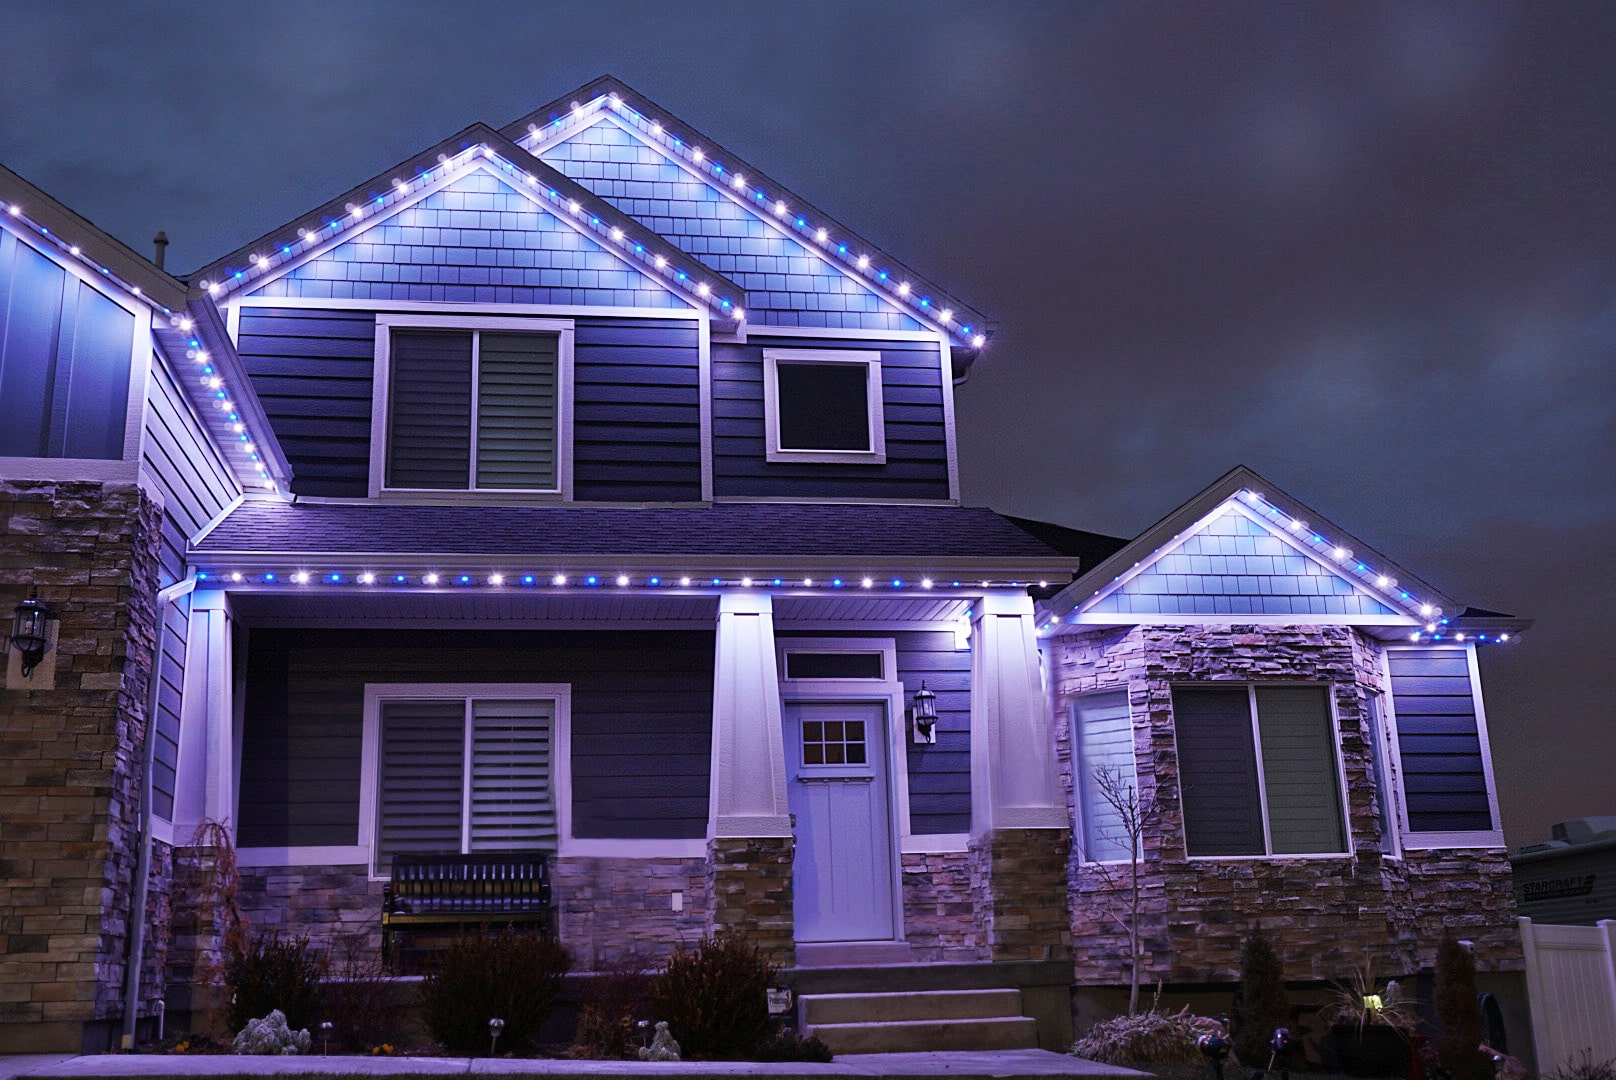 Lights on the exterior of the home